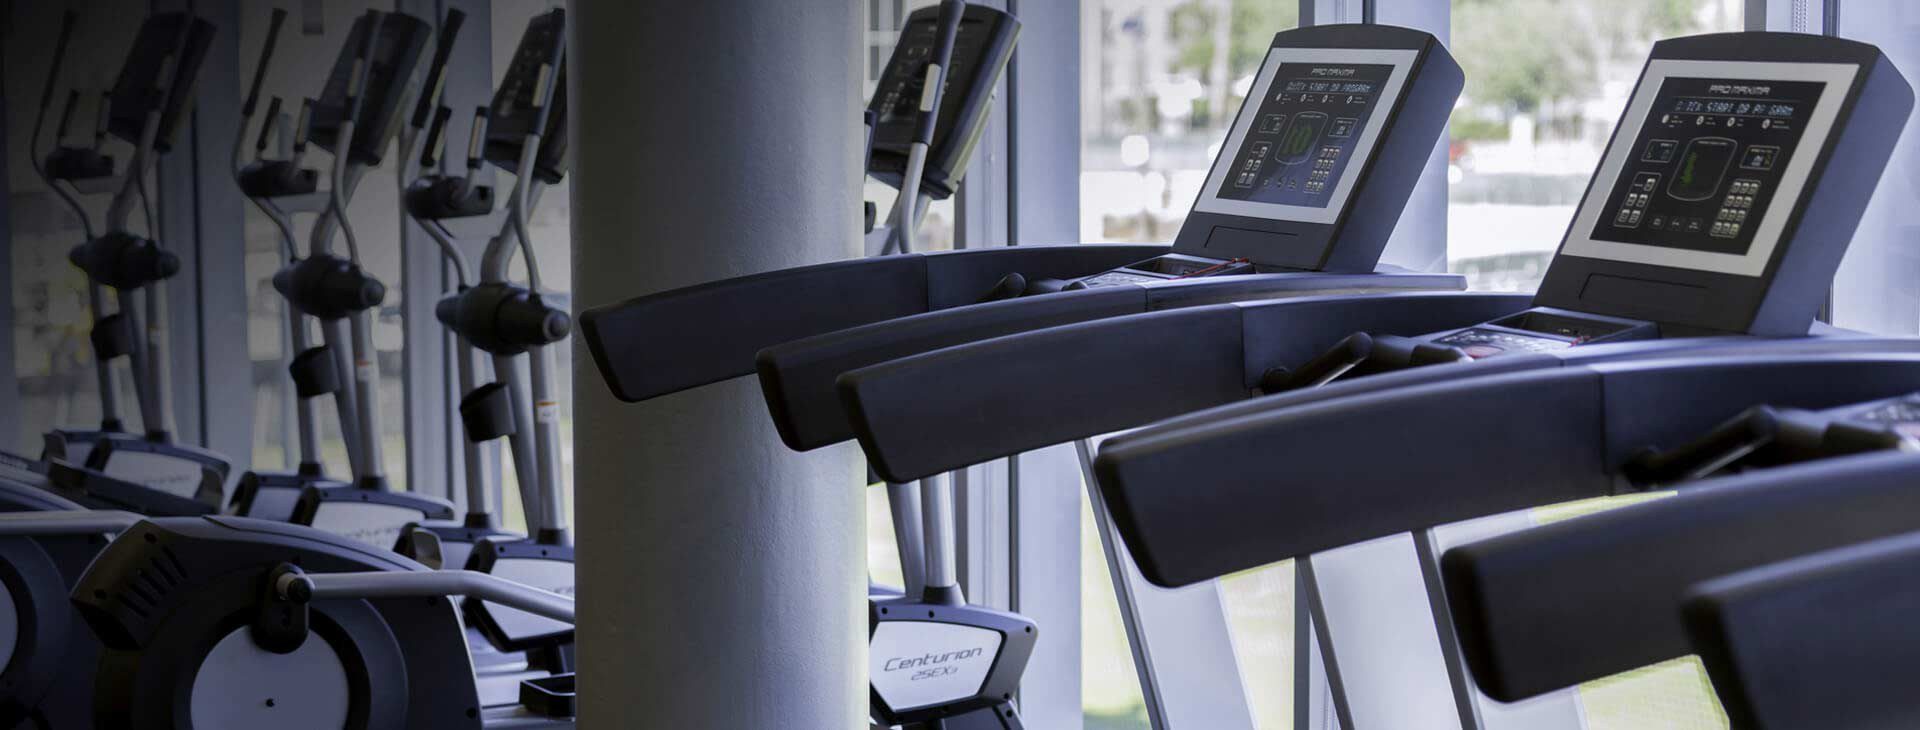 Treadmill and cycling equipment